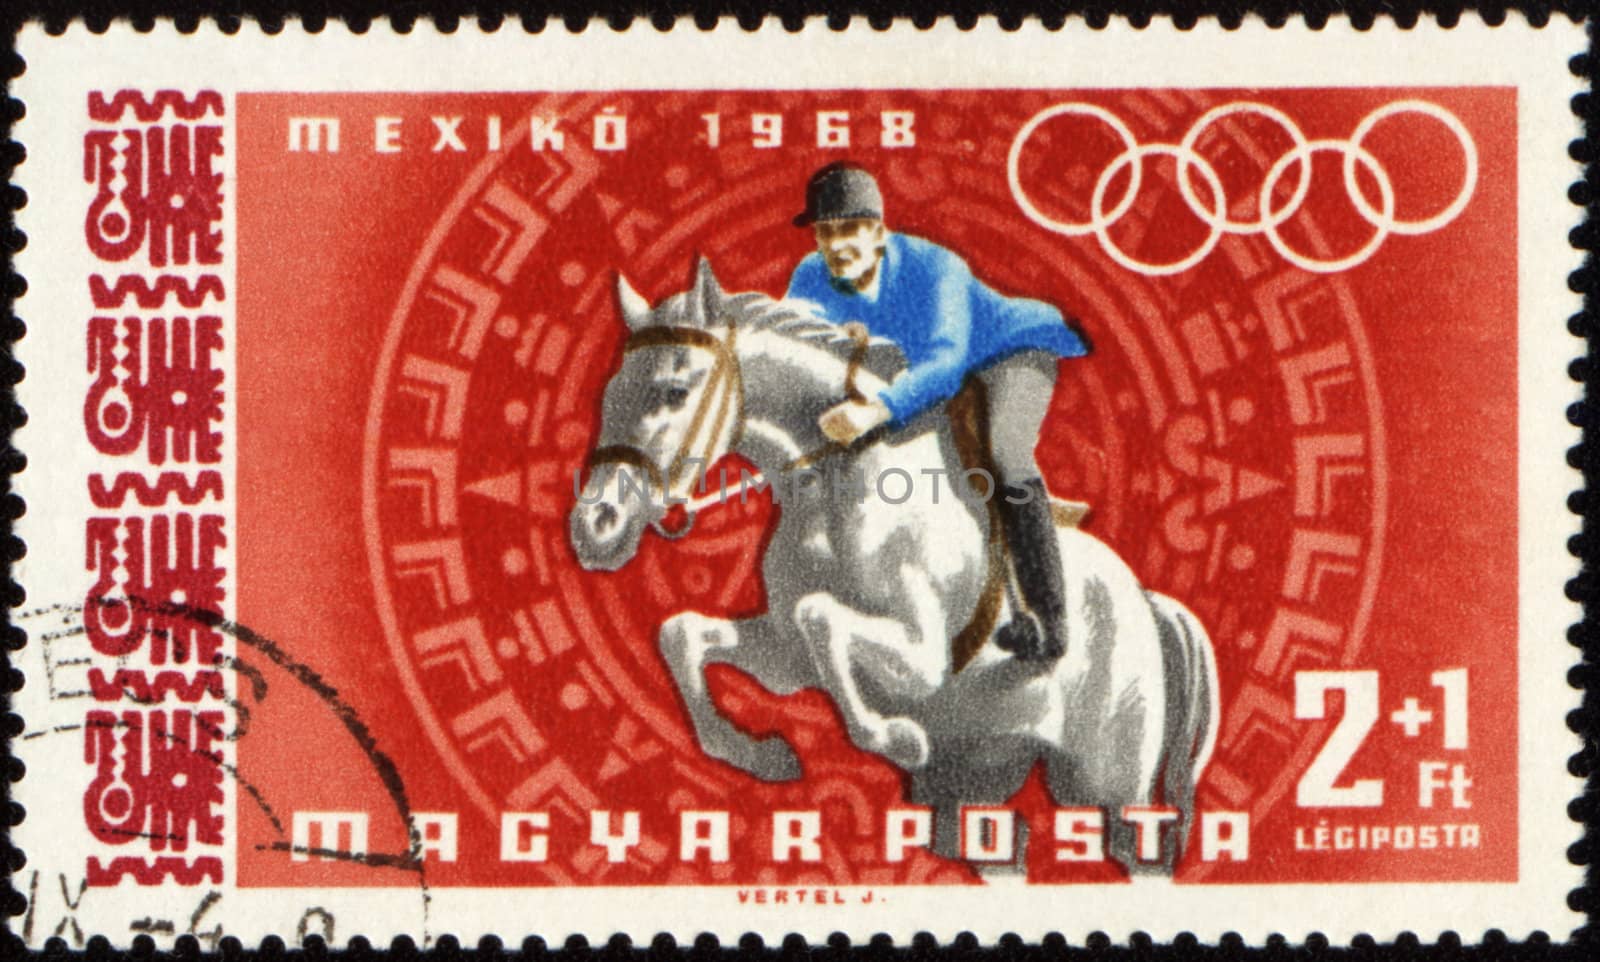 HUNGARY - CIRCA 1968: A post stamp printed in Hungary shows jockey riding horse, devoted to Olympic games in Mexico, series, circa 1968